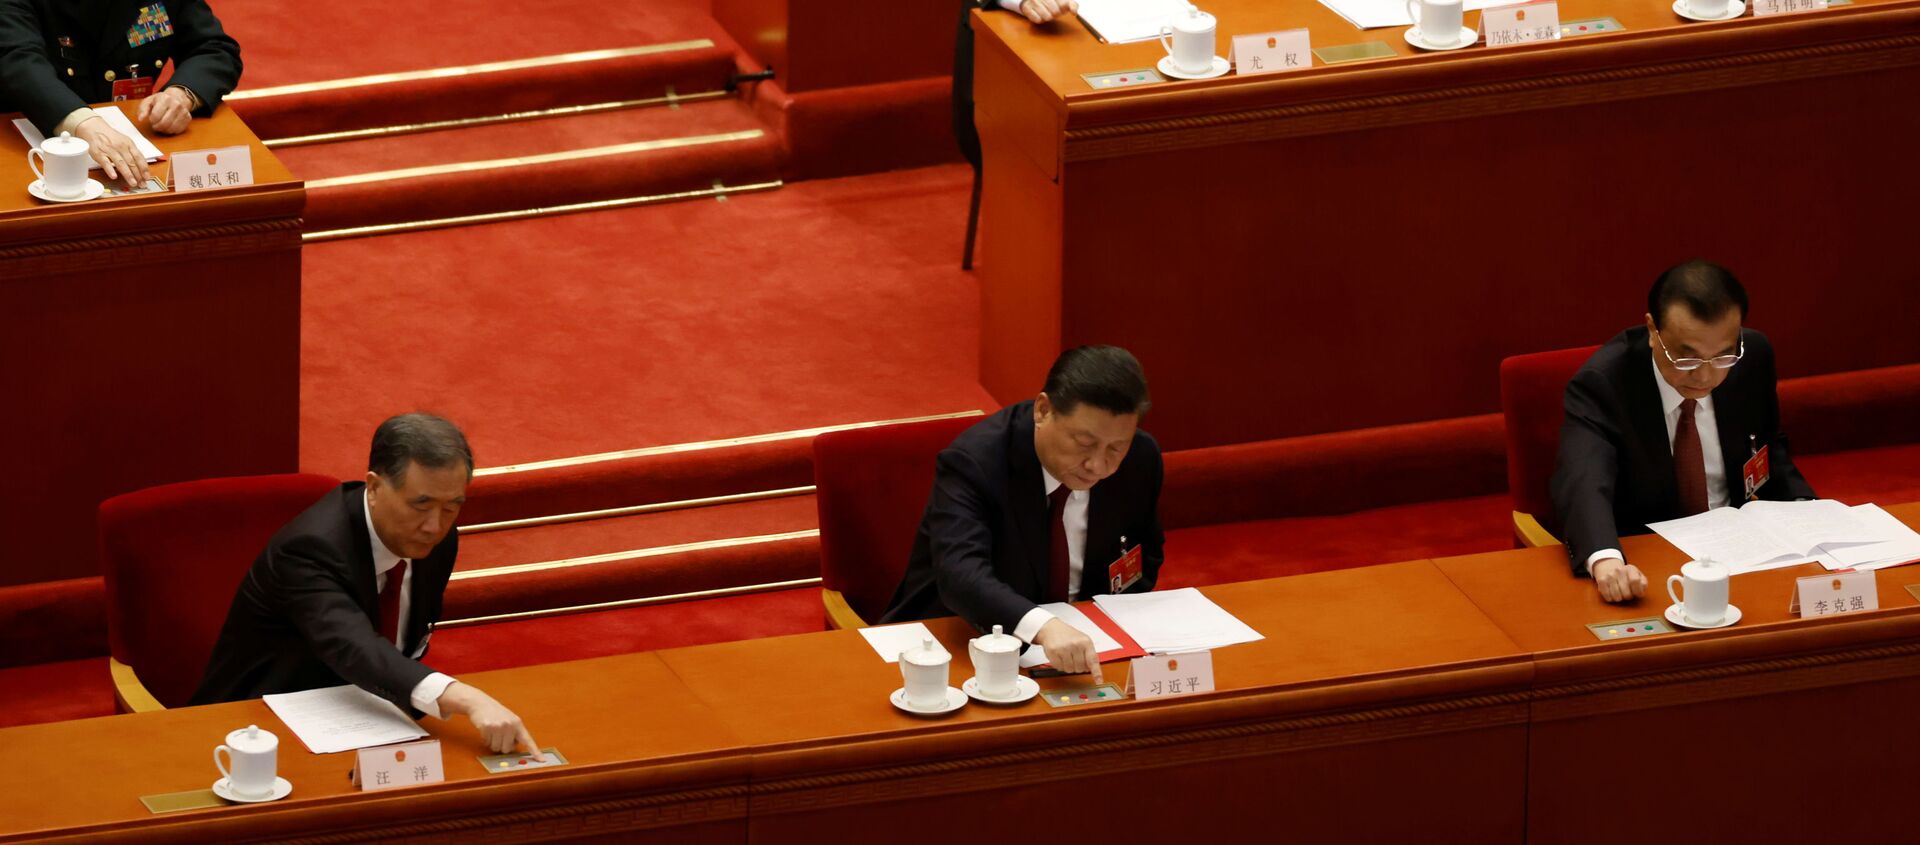 Chinese President Xi Jinping and other leaders cast their votes on Hong Kong electoral reform at the closing session of the National People's Congress (NPC) at the Great Hall of the People in Beijing, China March 11, 2021 - Sputnik International, 1920, 30.03.2021